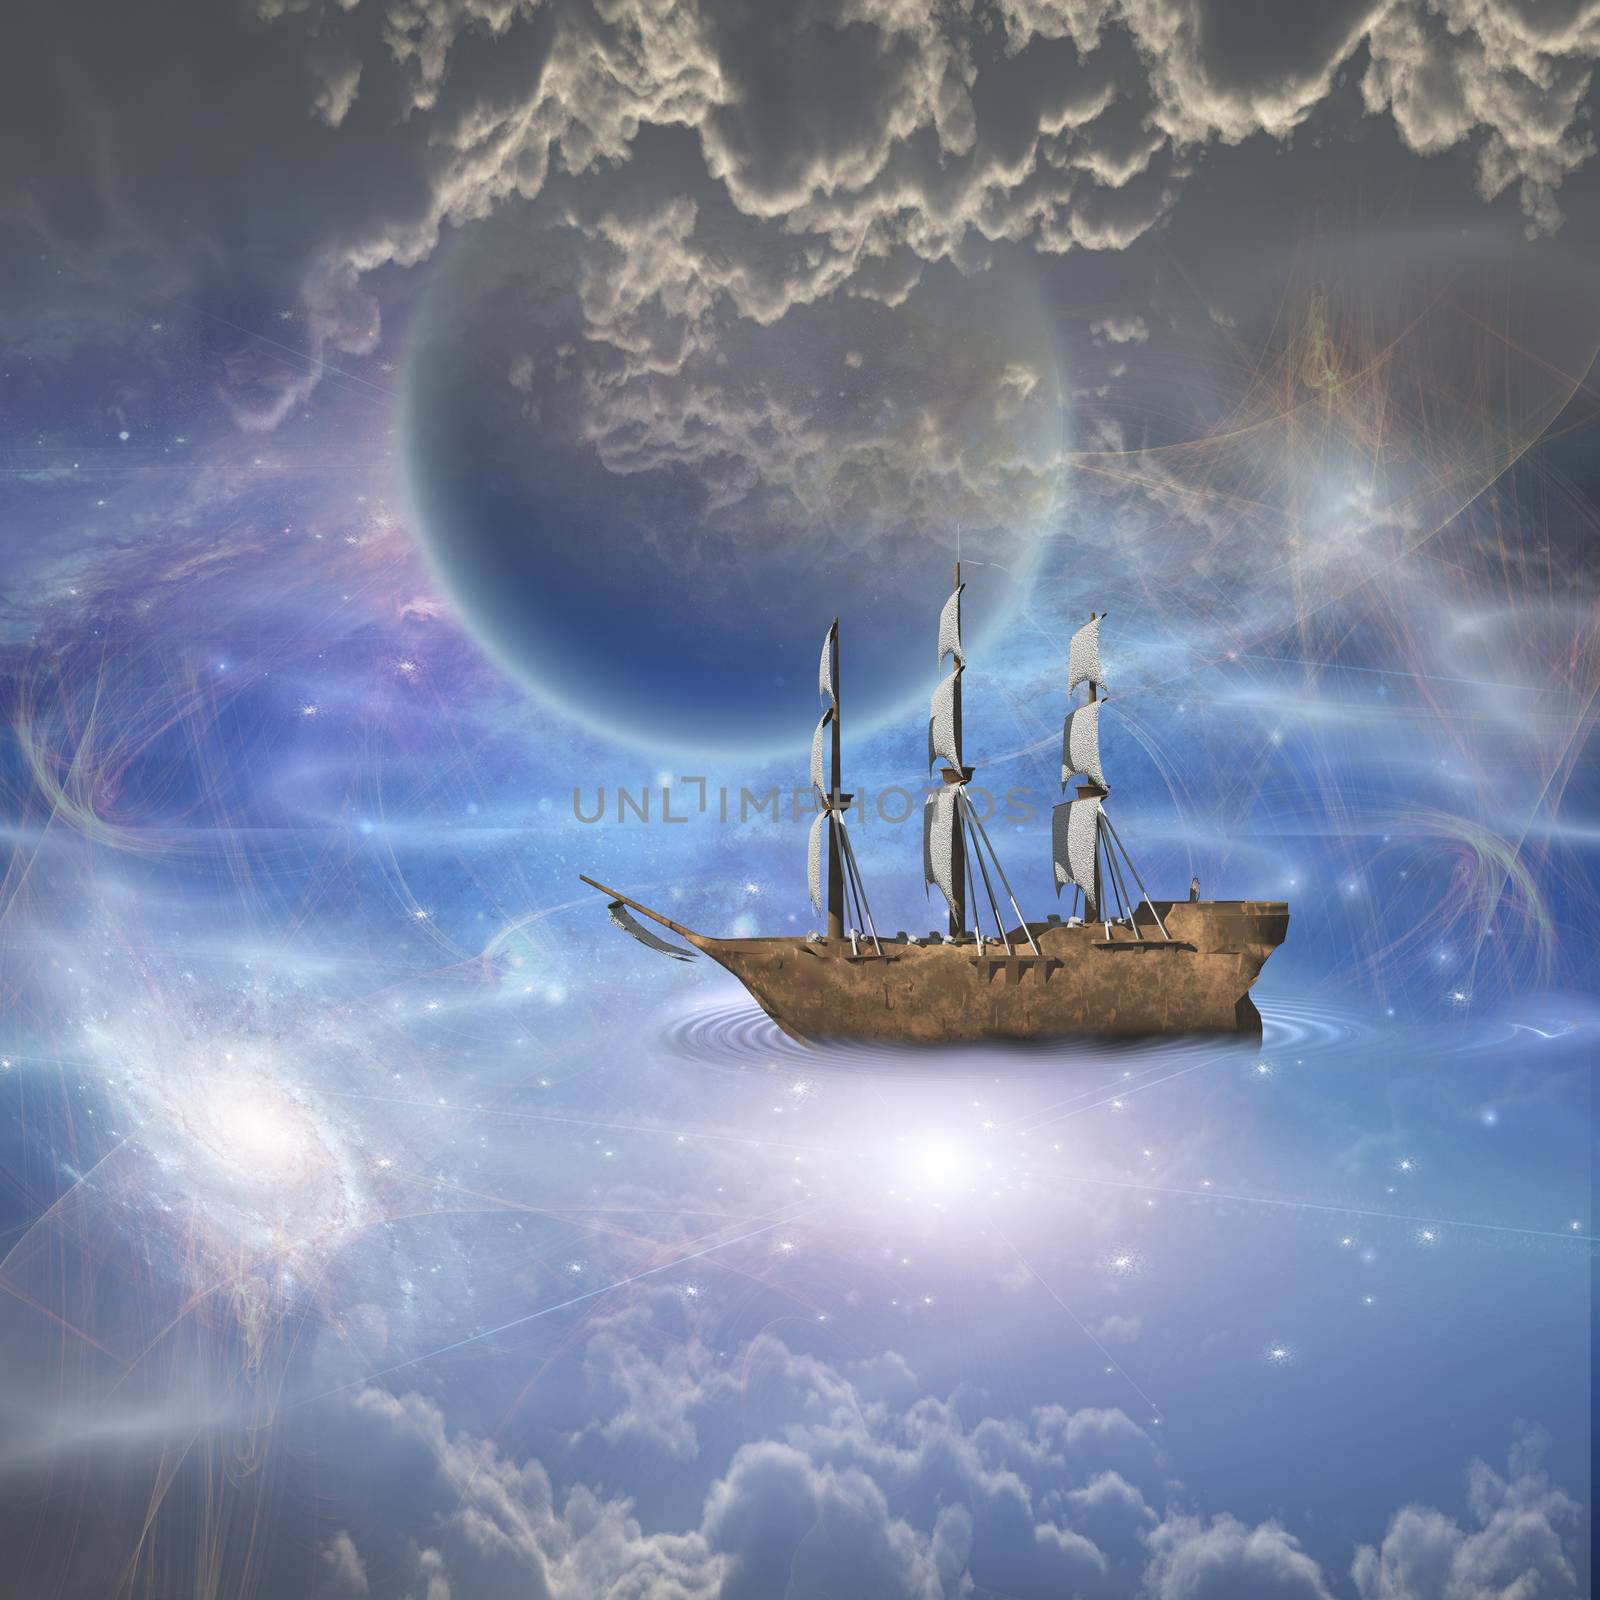 Sailing ship with full sails in fantastic scene